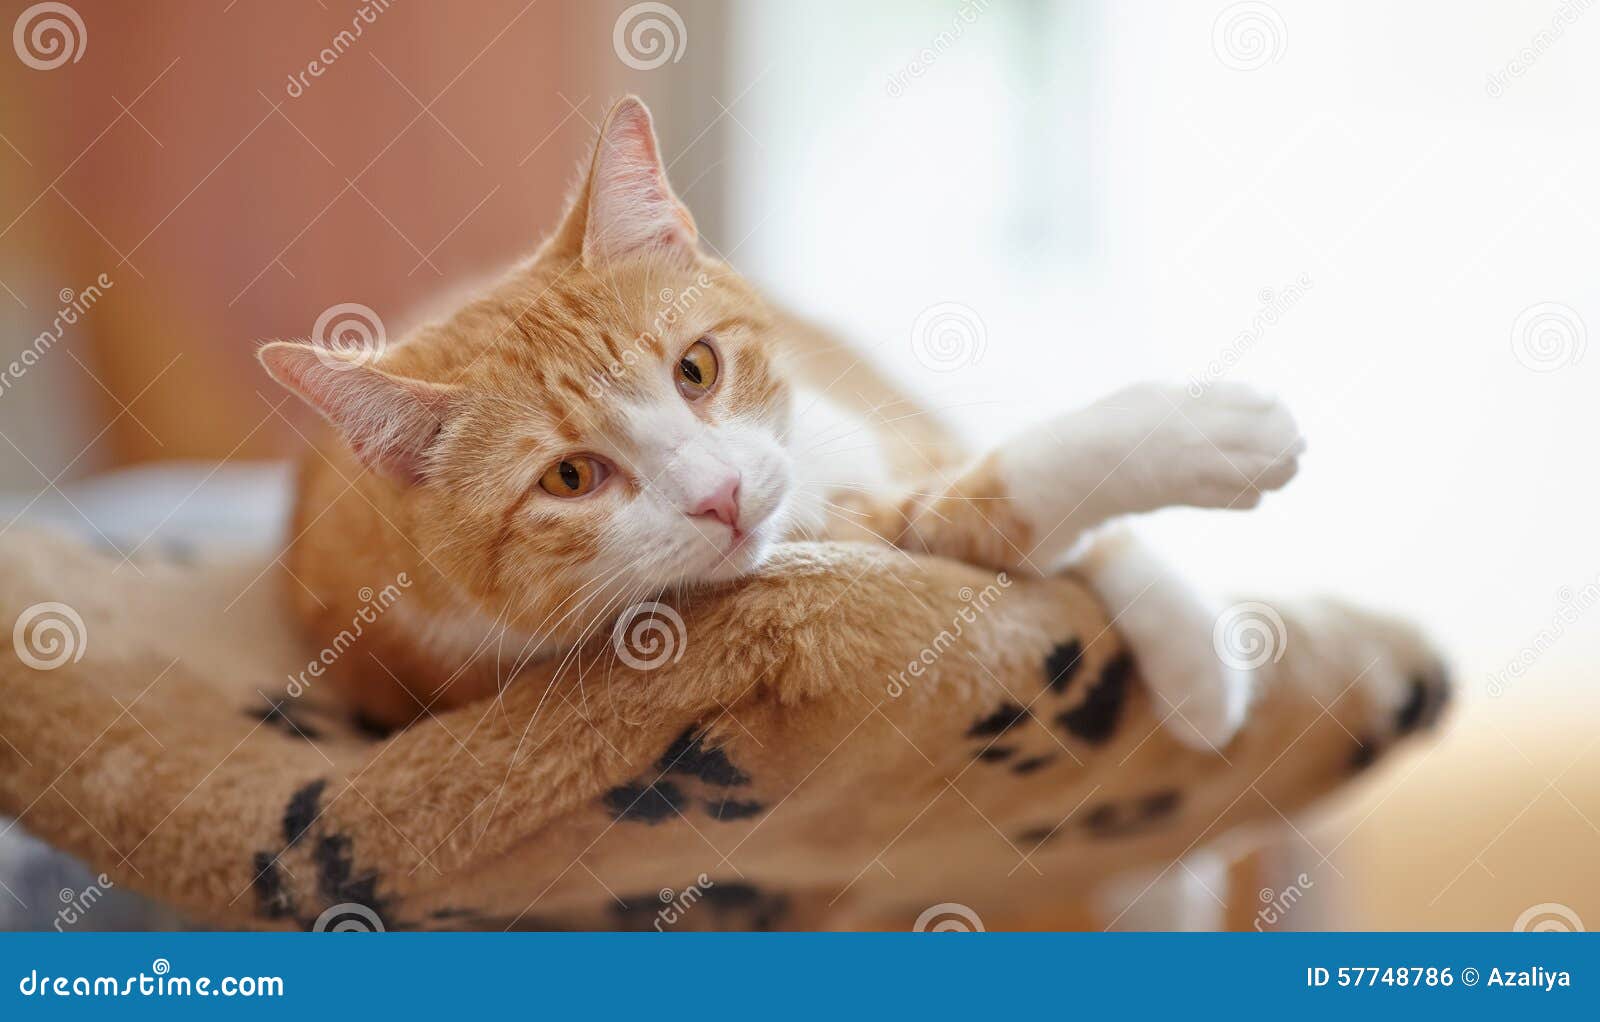 The Red Striped Cat With Red Eyes Stock Photo - Image of claw, purr